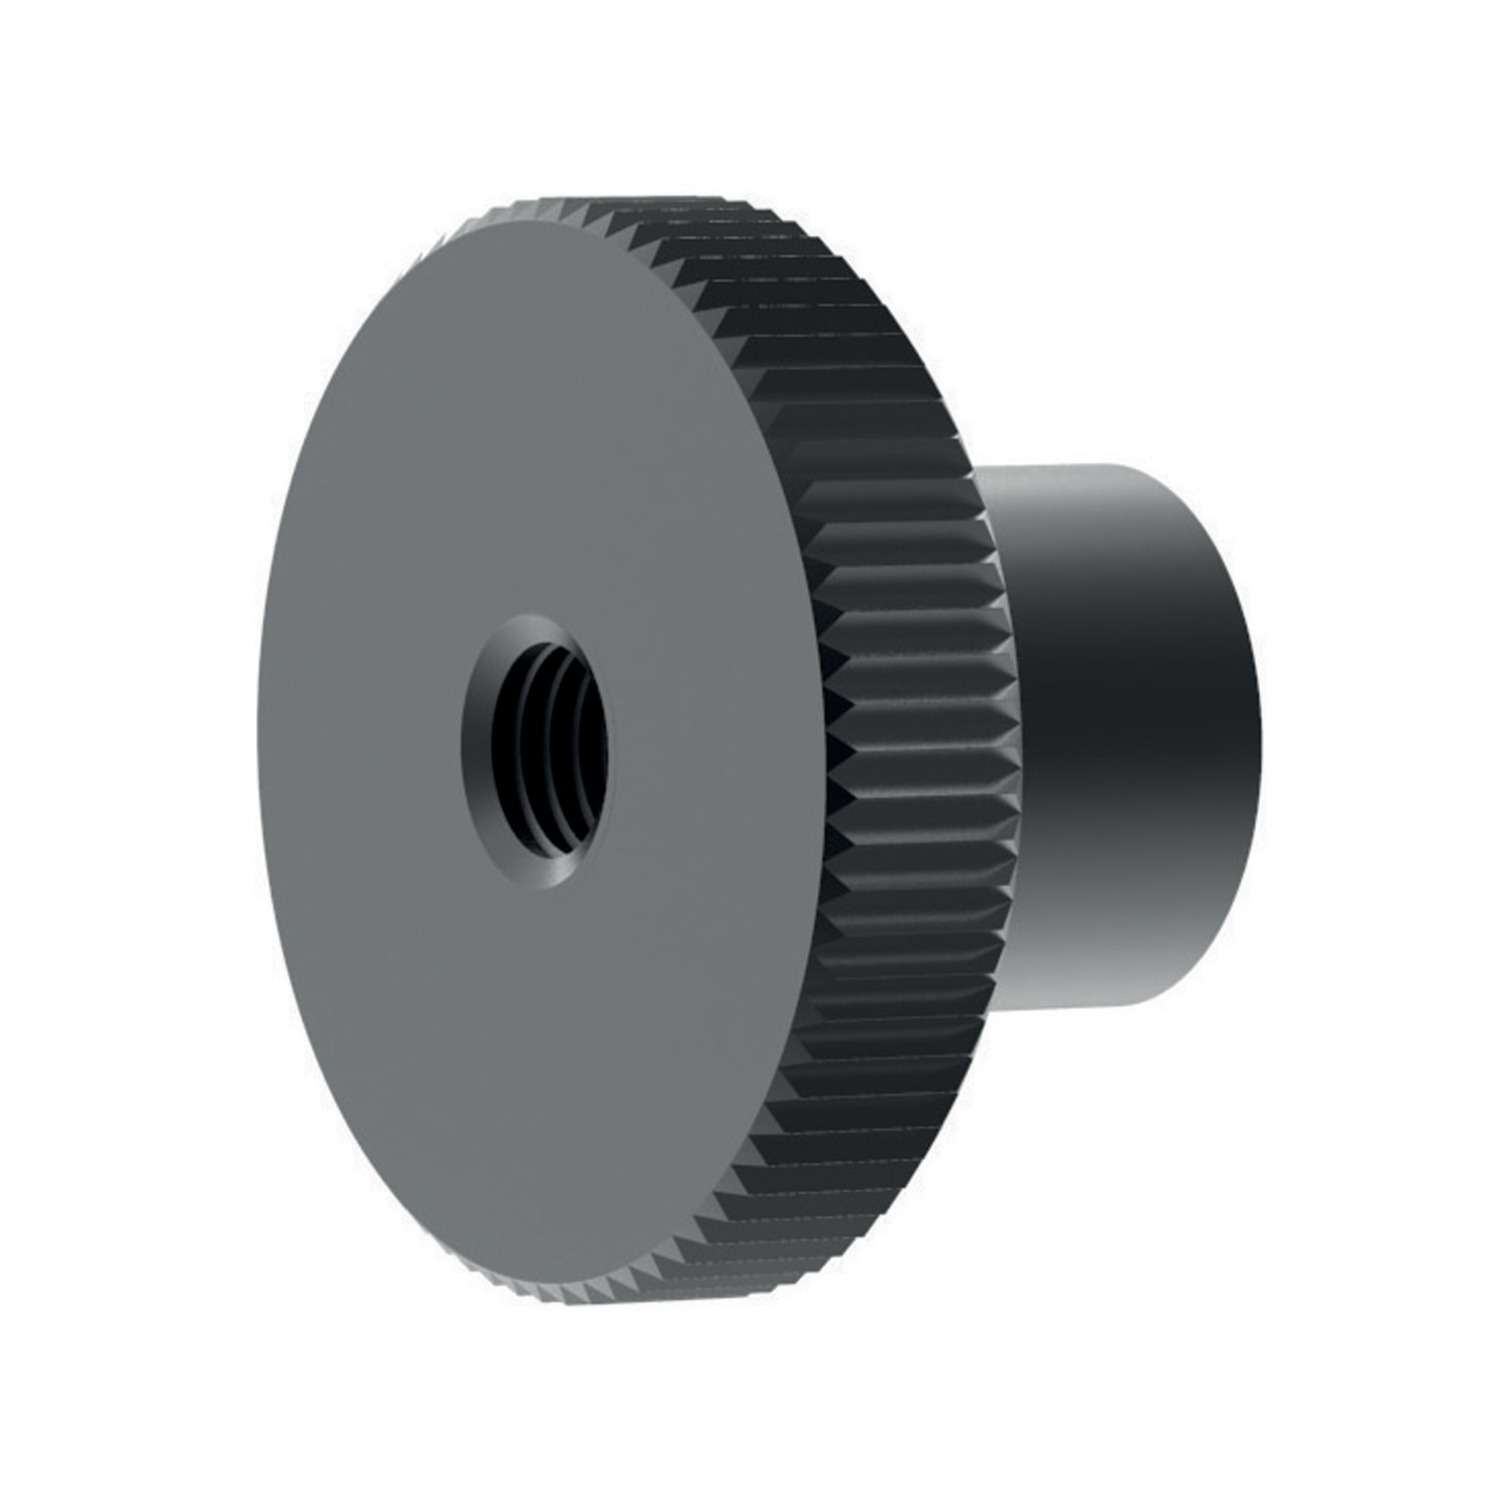 Knurled Nuts Knurled thumb nut with collar comes in blackened steel and includes an M12 size which is outside of the DIN 466 standard.